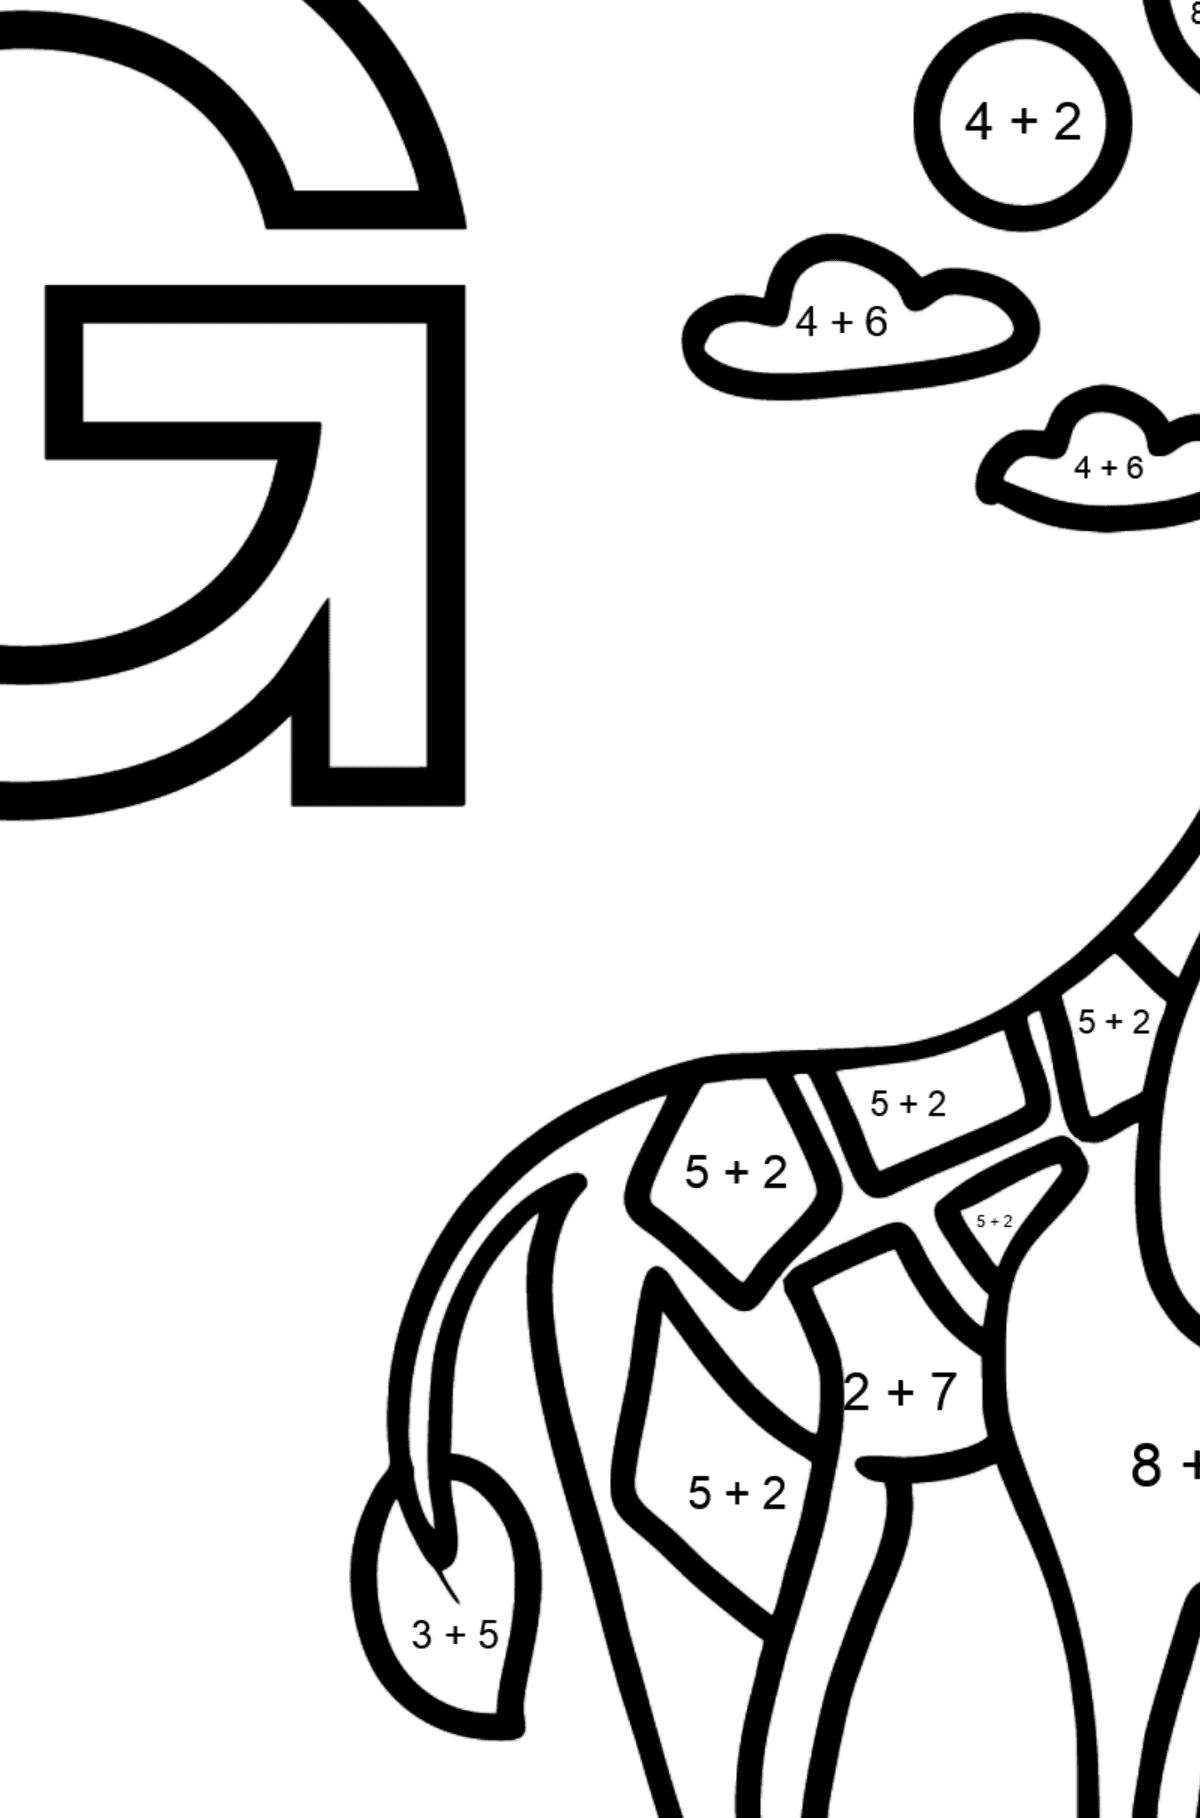 Portuguese Letter G coloring pages - GIRAFA - Math Coloring - Addition for Kids